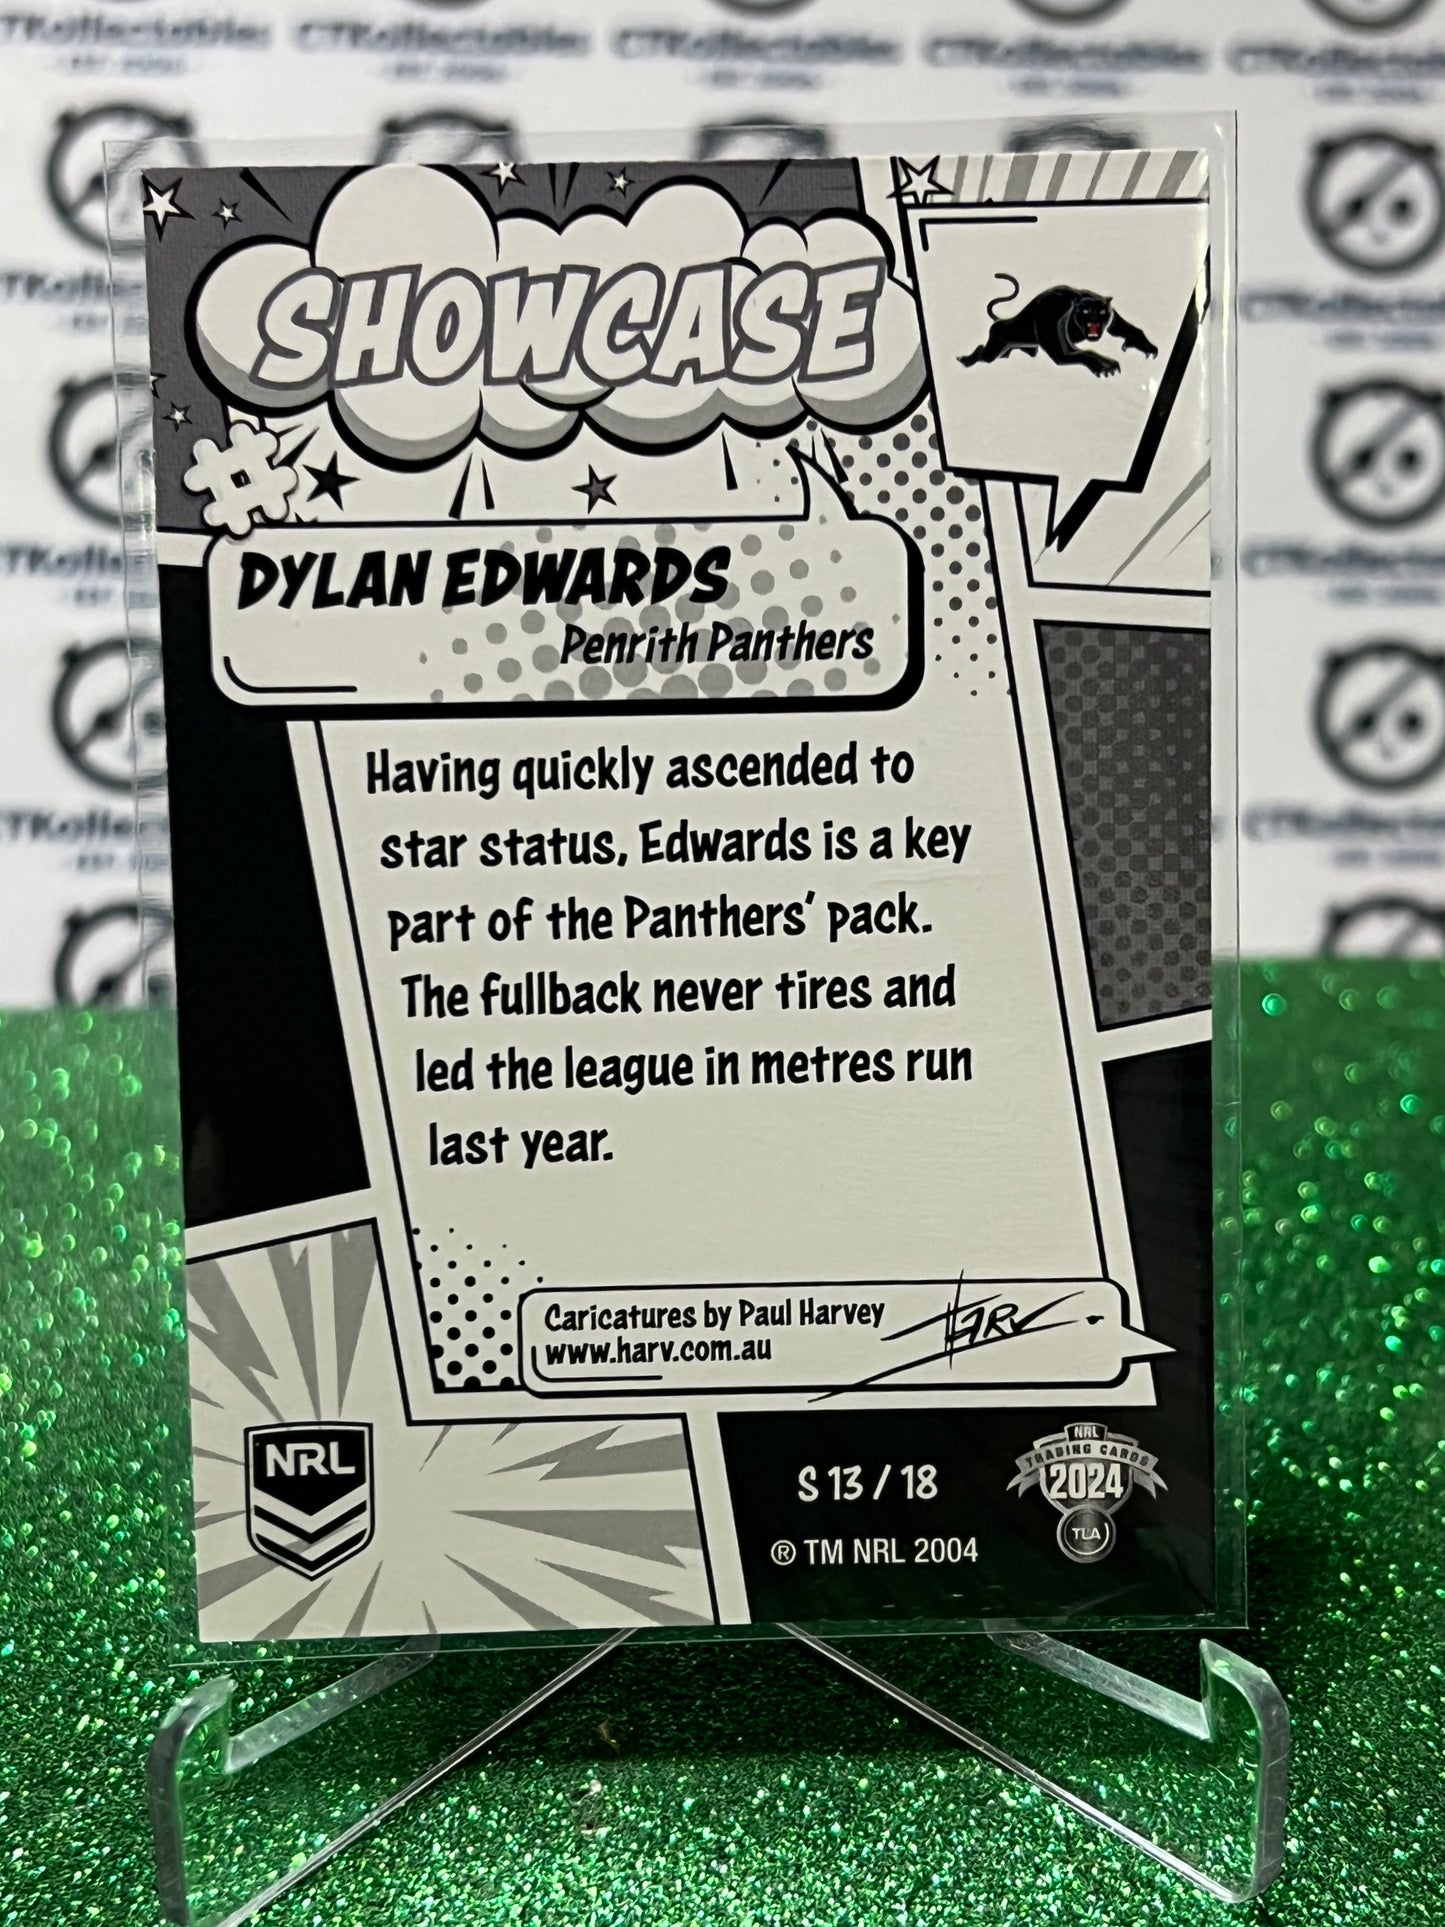 2024 NRL TRADERS DYLAN EDWARDS # S13/18  SHOWCASE PENRITH PANTHERS